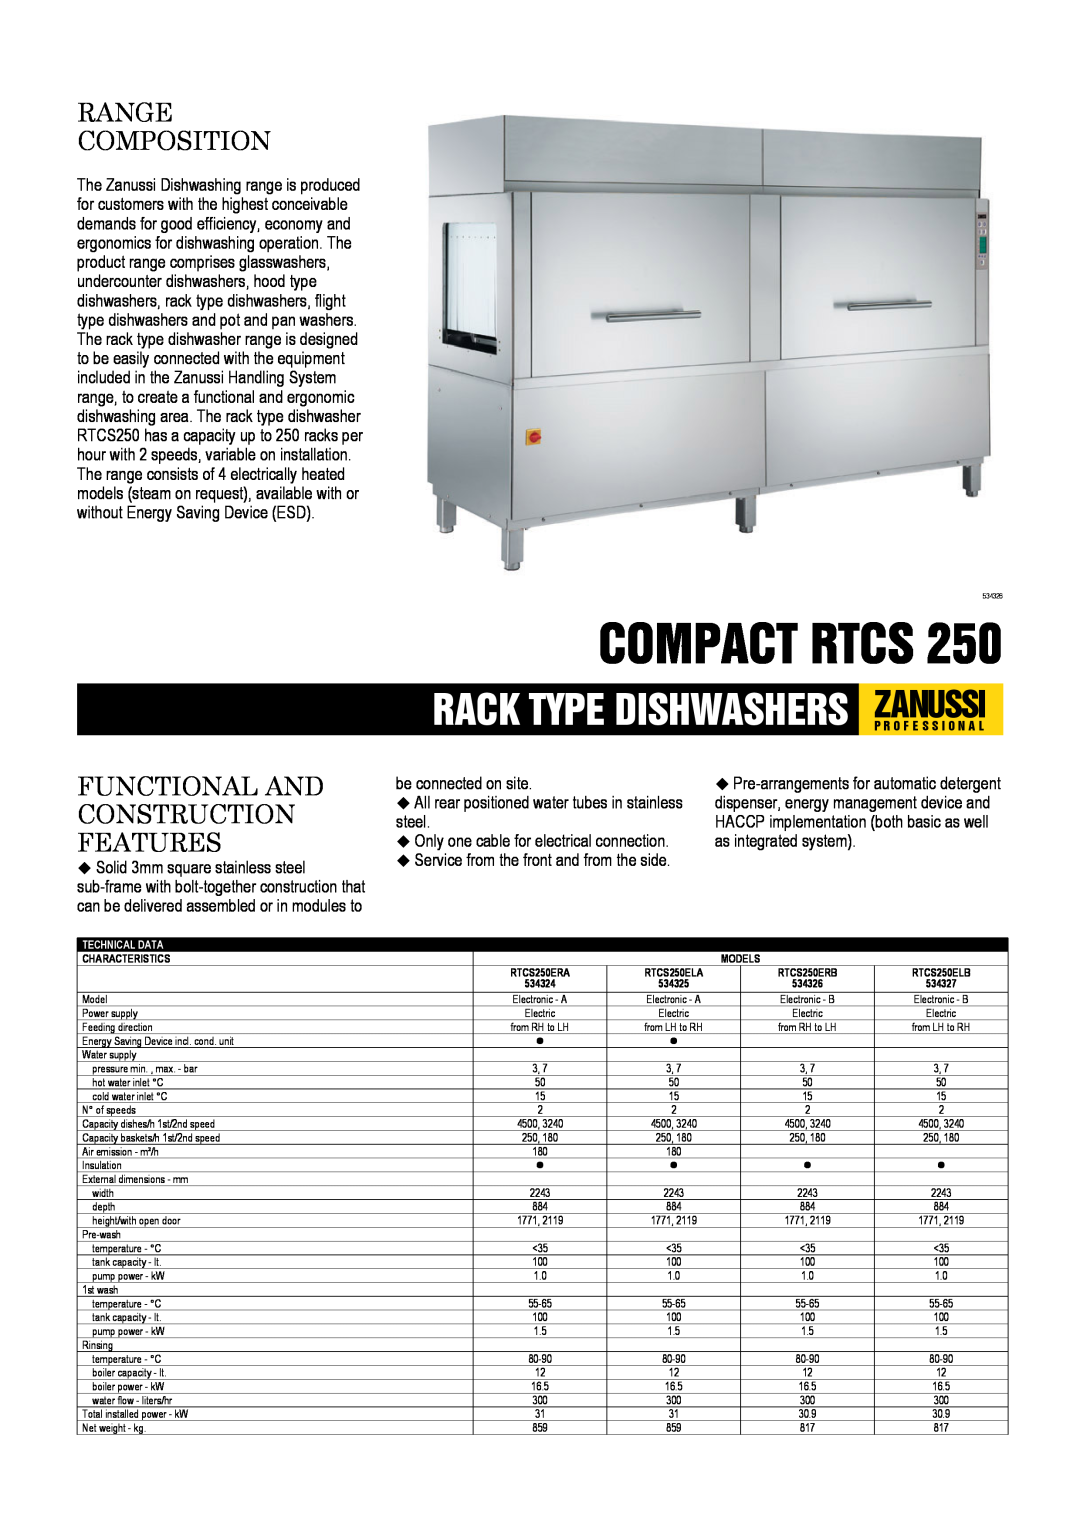 Zanussi RTCS250ERA, RTCS250ERB, RTCS250ELB dimensions Compact Rtcs, Range Composition, Functional And Construction Features 